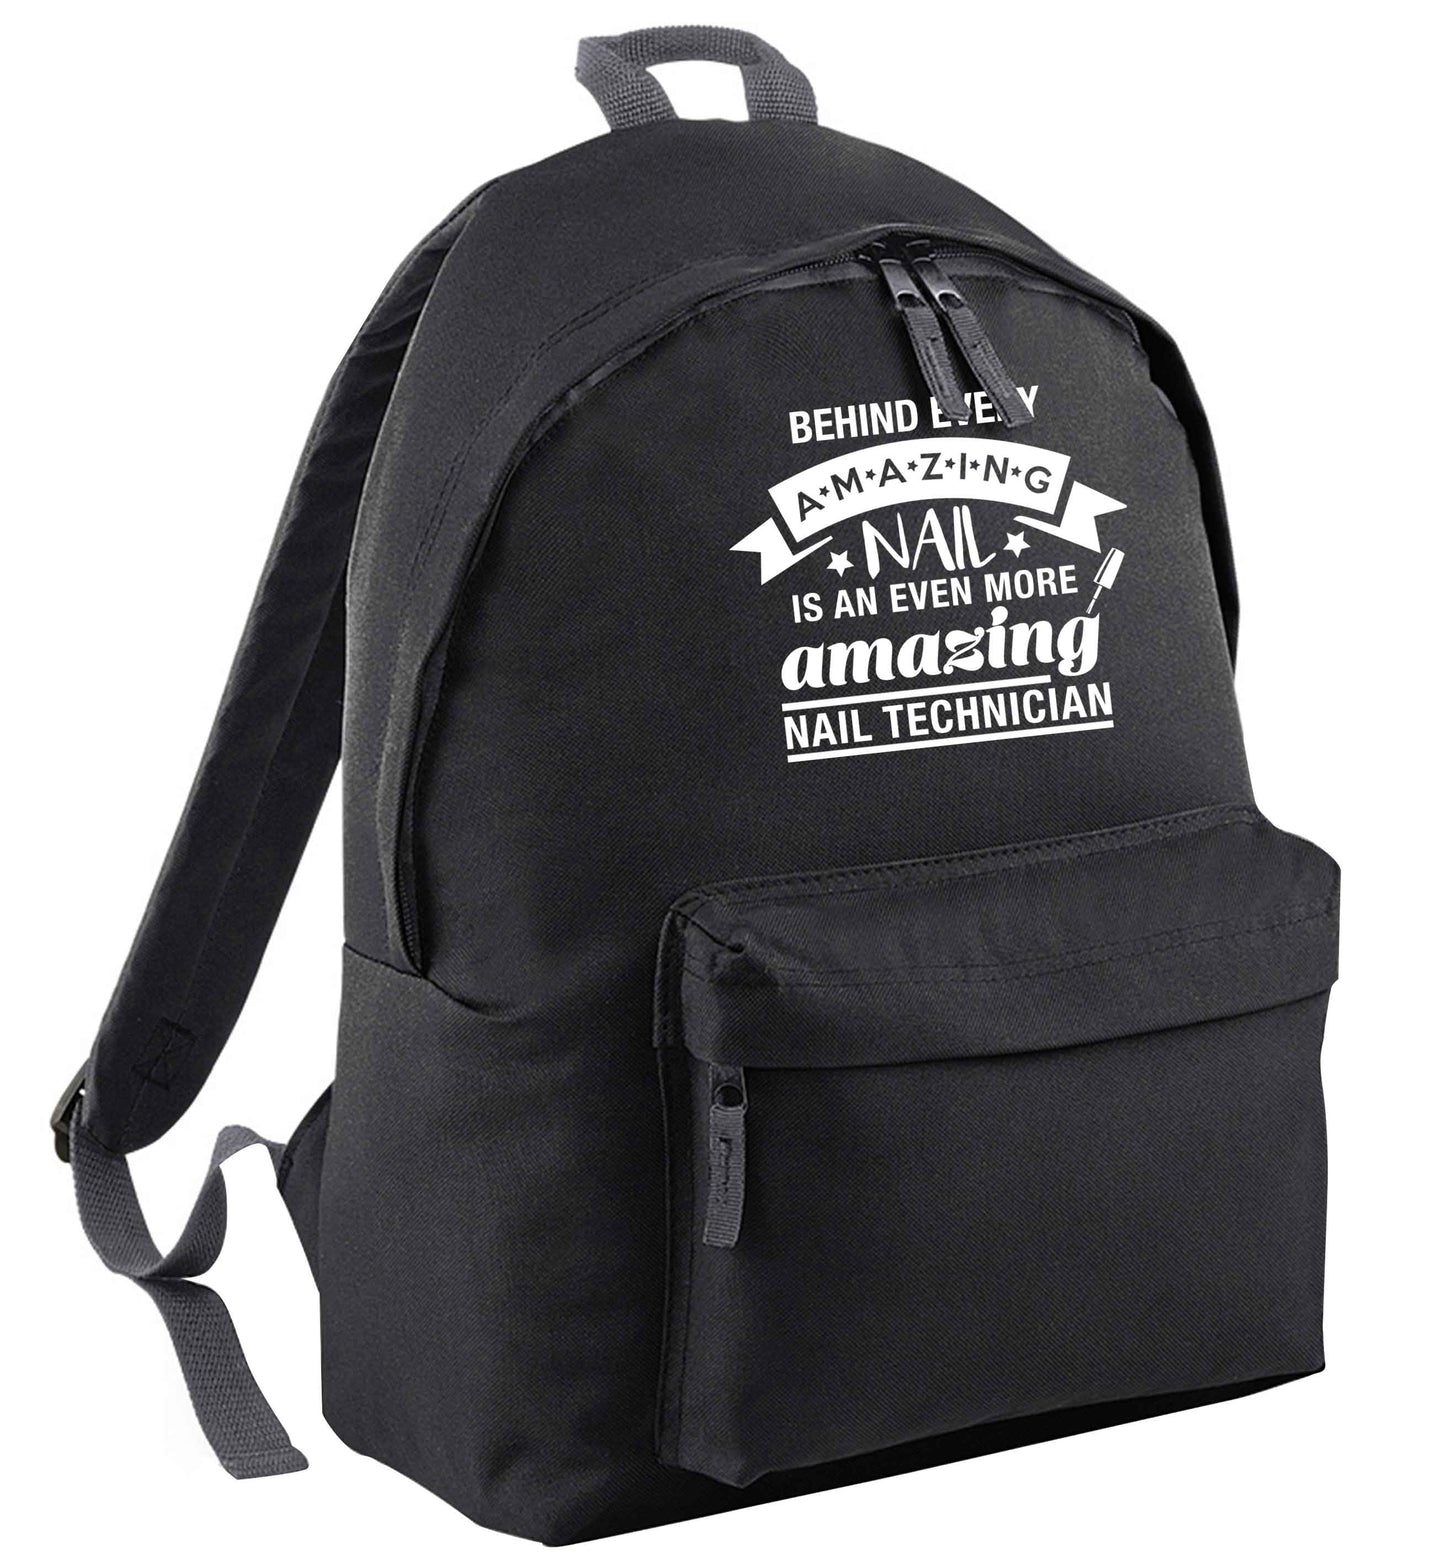 Behind every amazing nail is an even more amazing nail technician black adults backpack